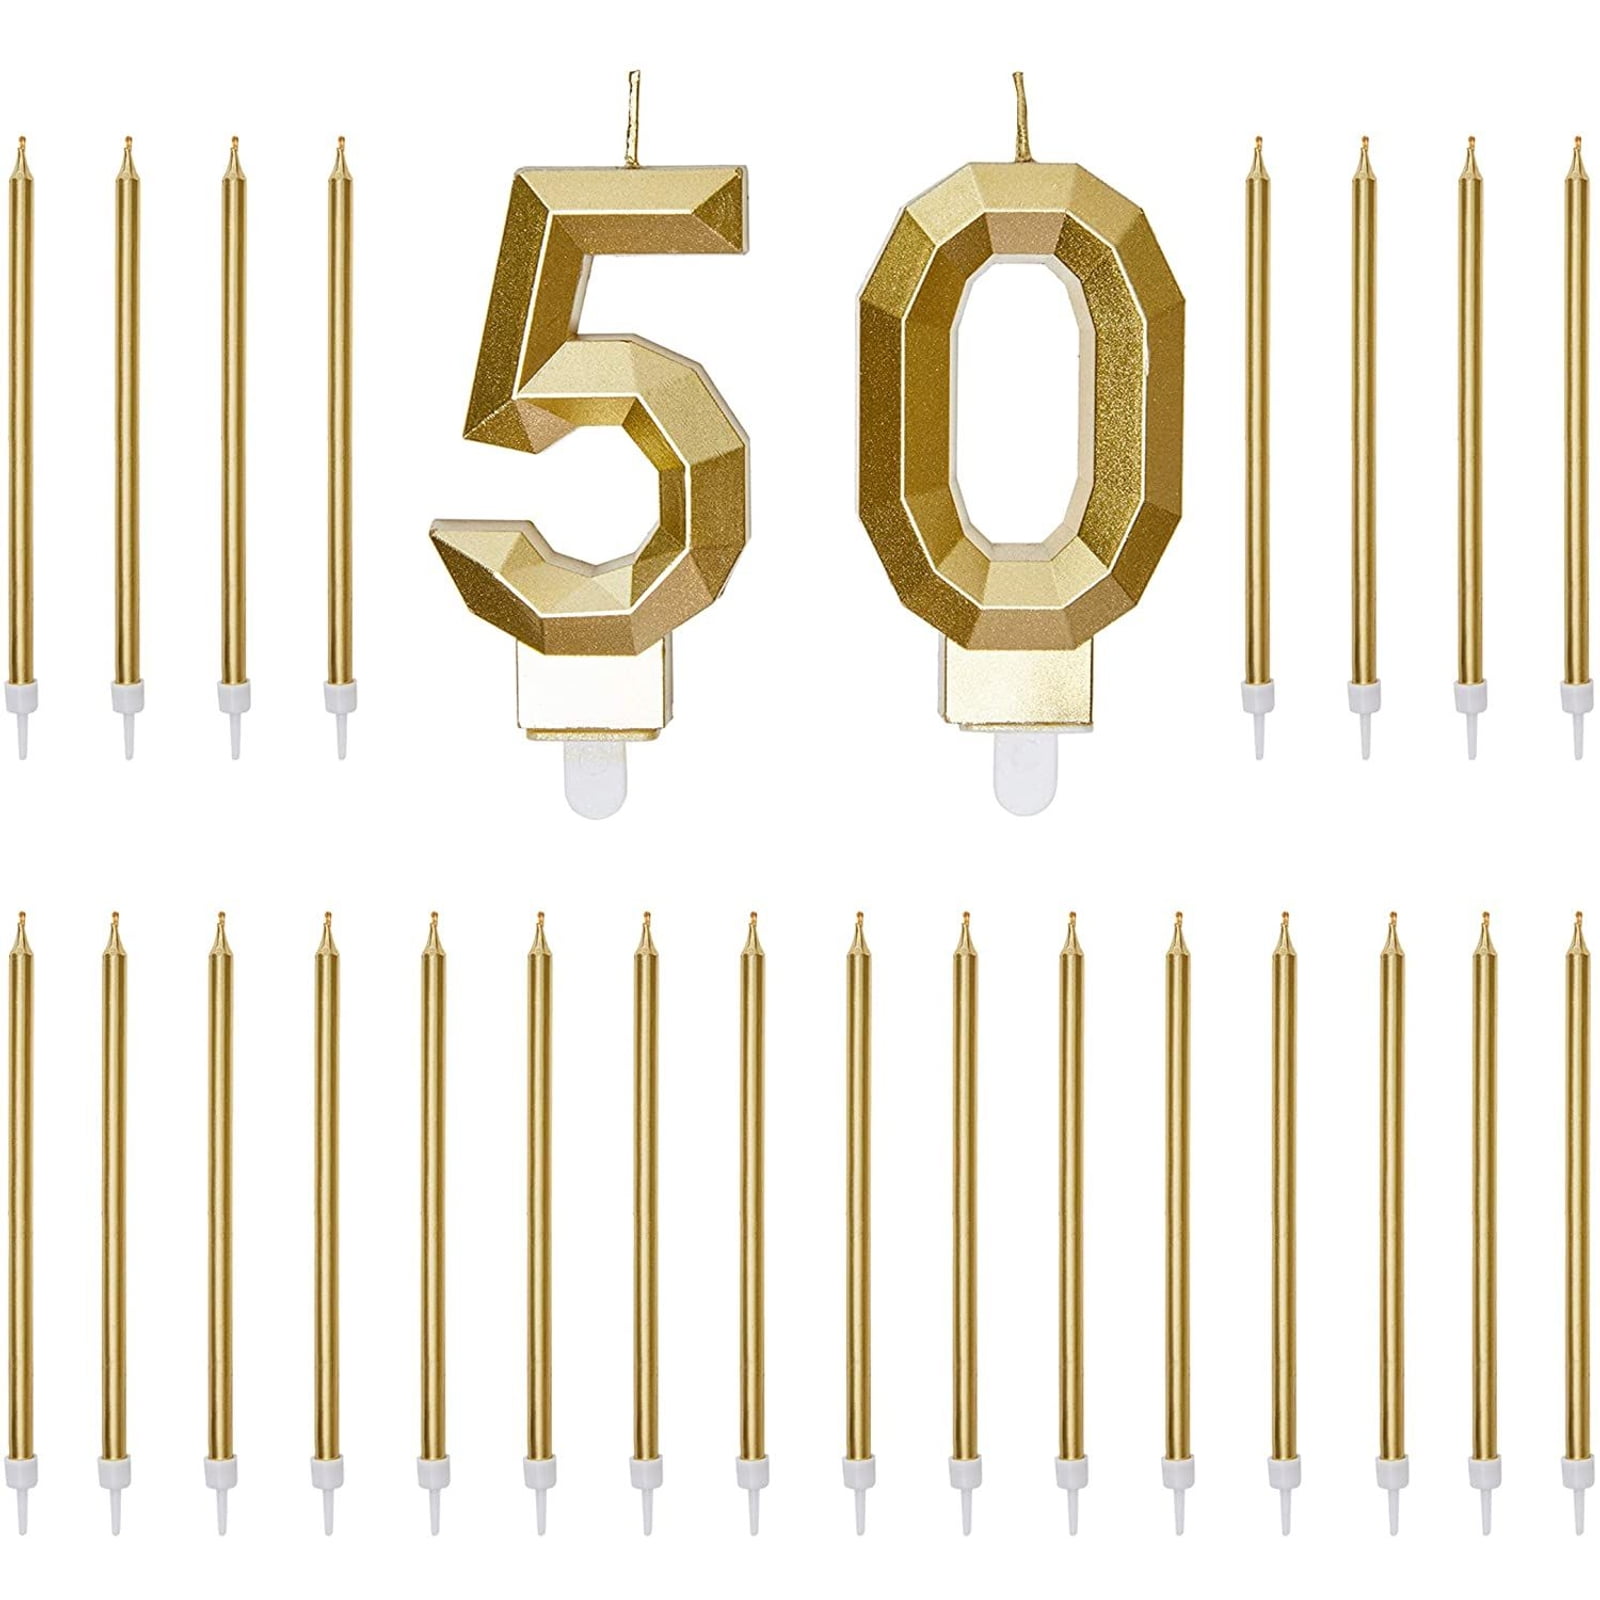 Number 40 Cake Topper with Candles in Holder for 40th Birthday Gold, 26 Pieces